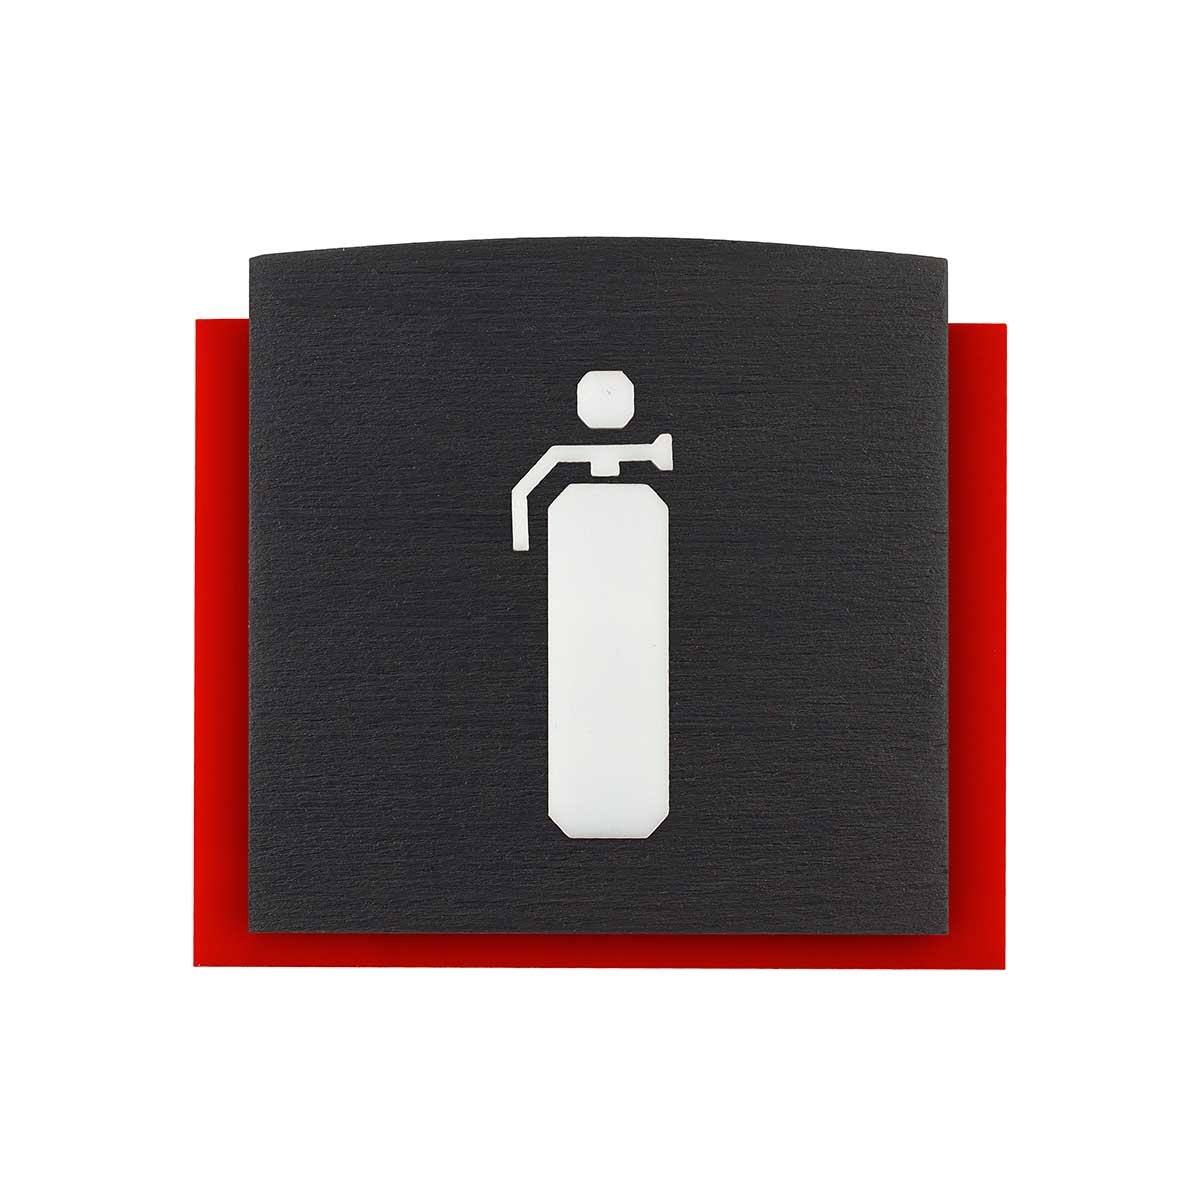 Wood Extinguisher Fire Safety Sign for Office Information signs Anthracite Gray Bsign